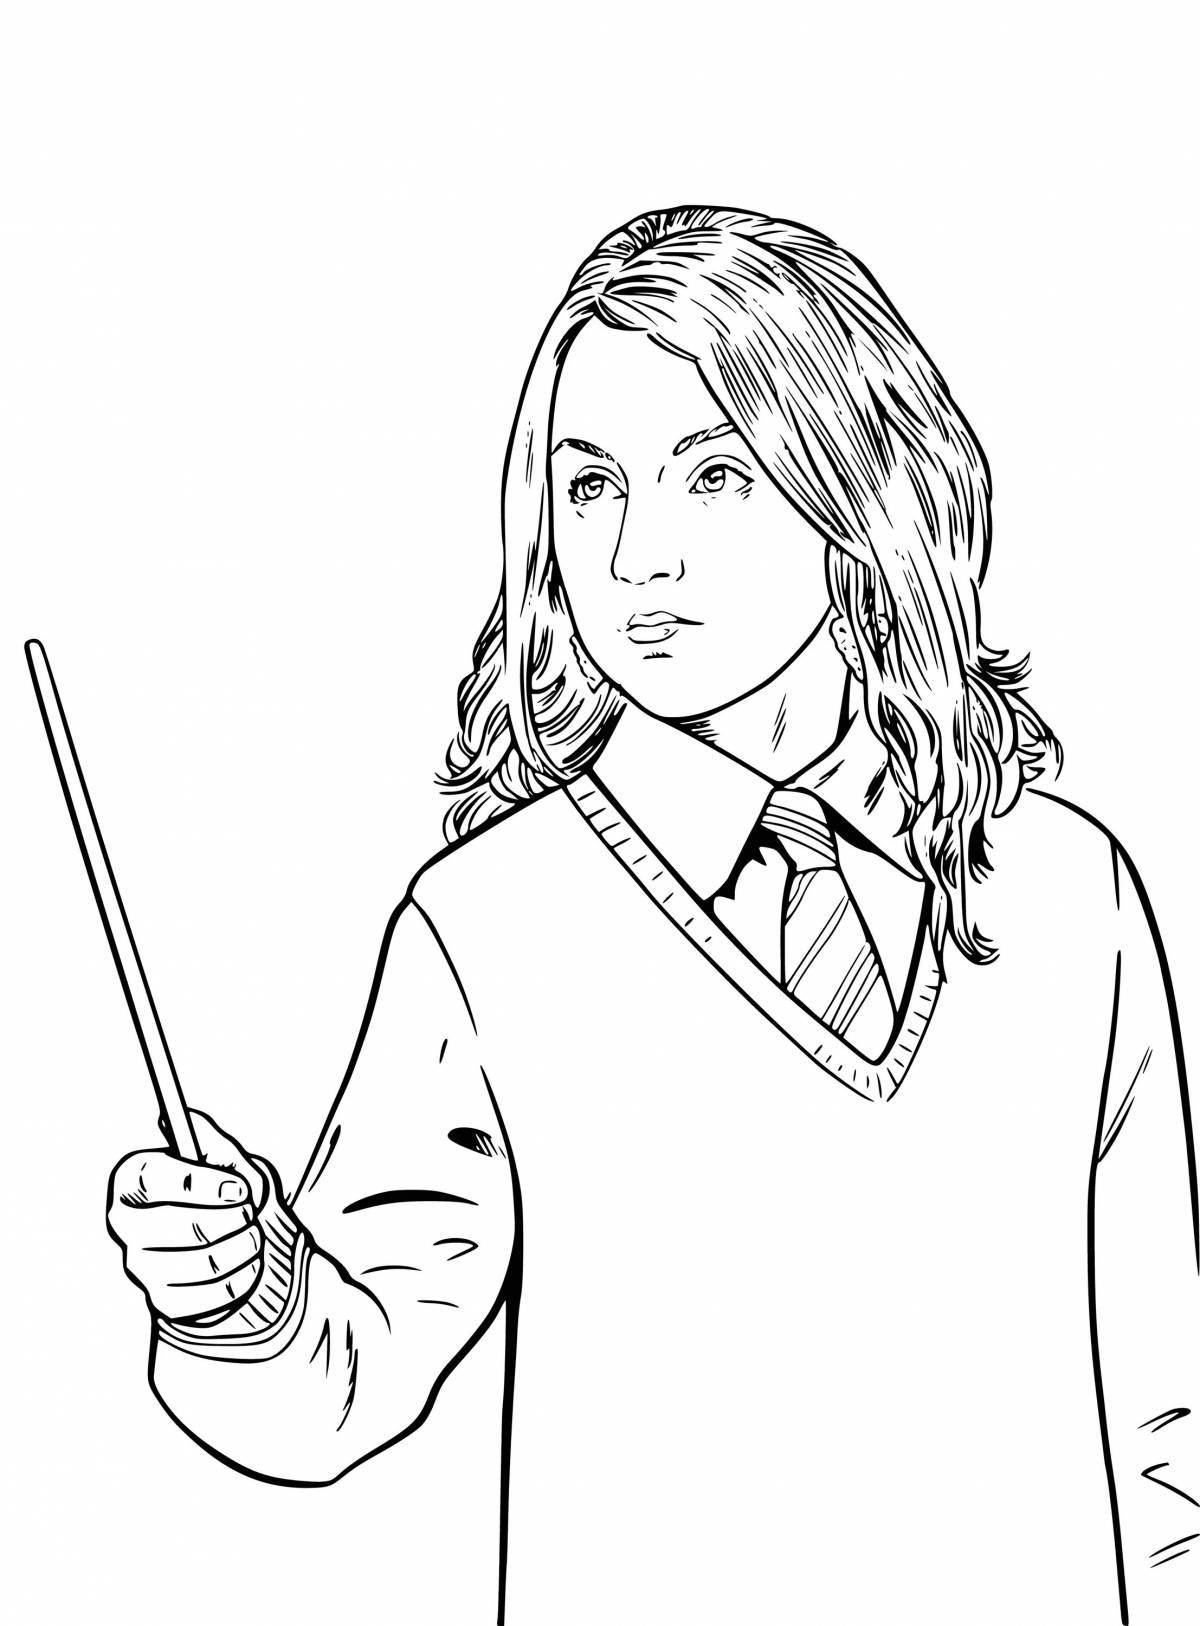 Awesome round harry potter coloring page